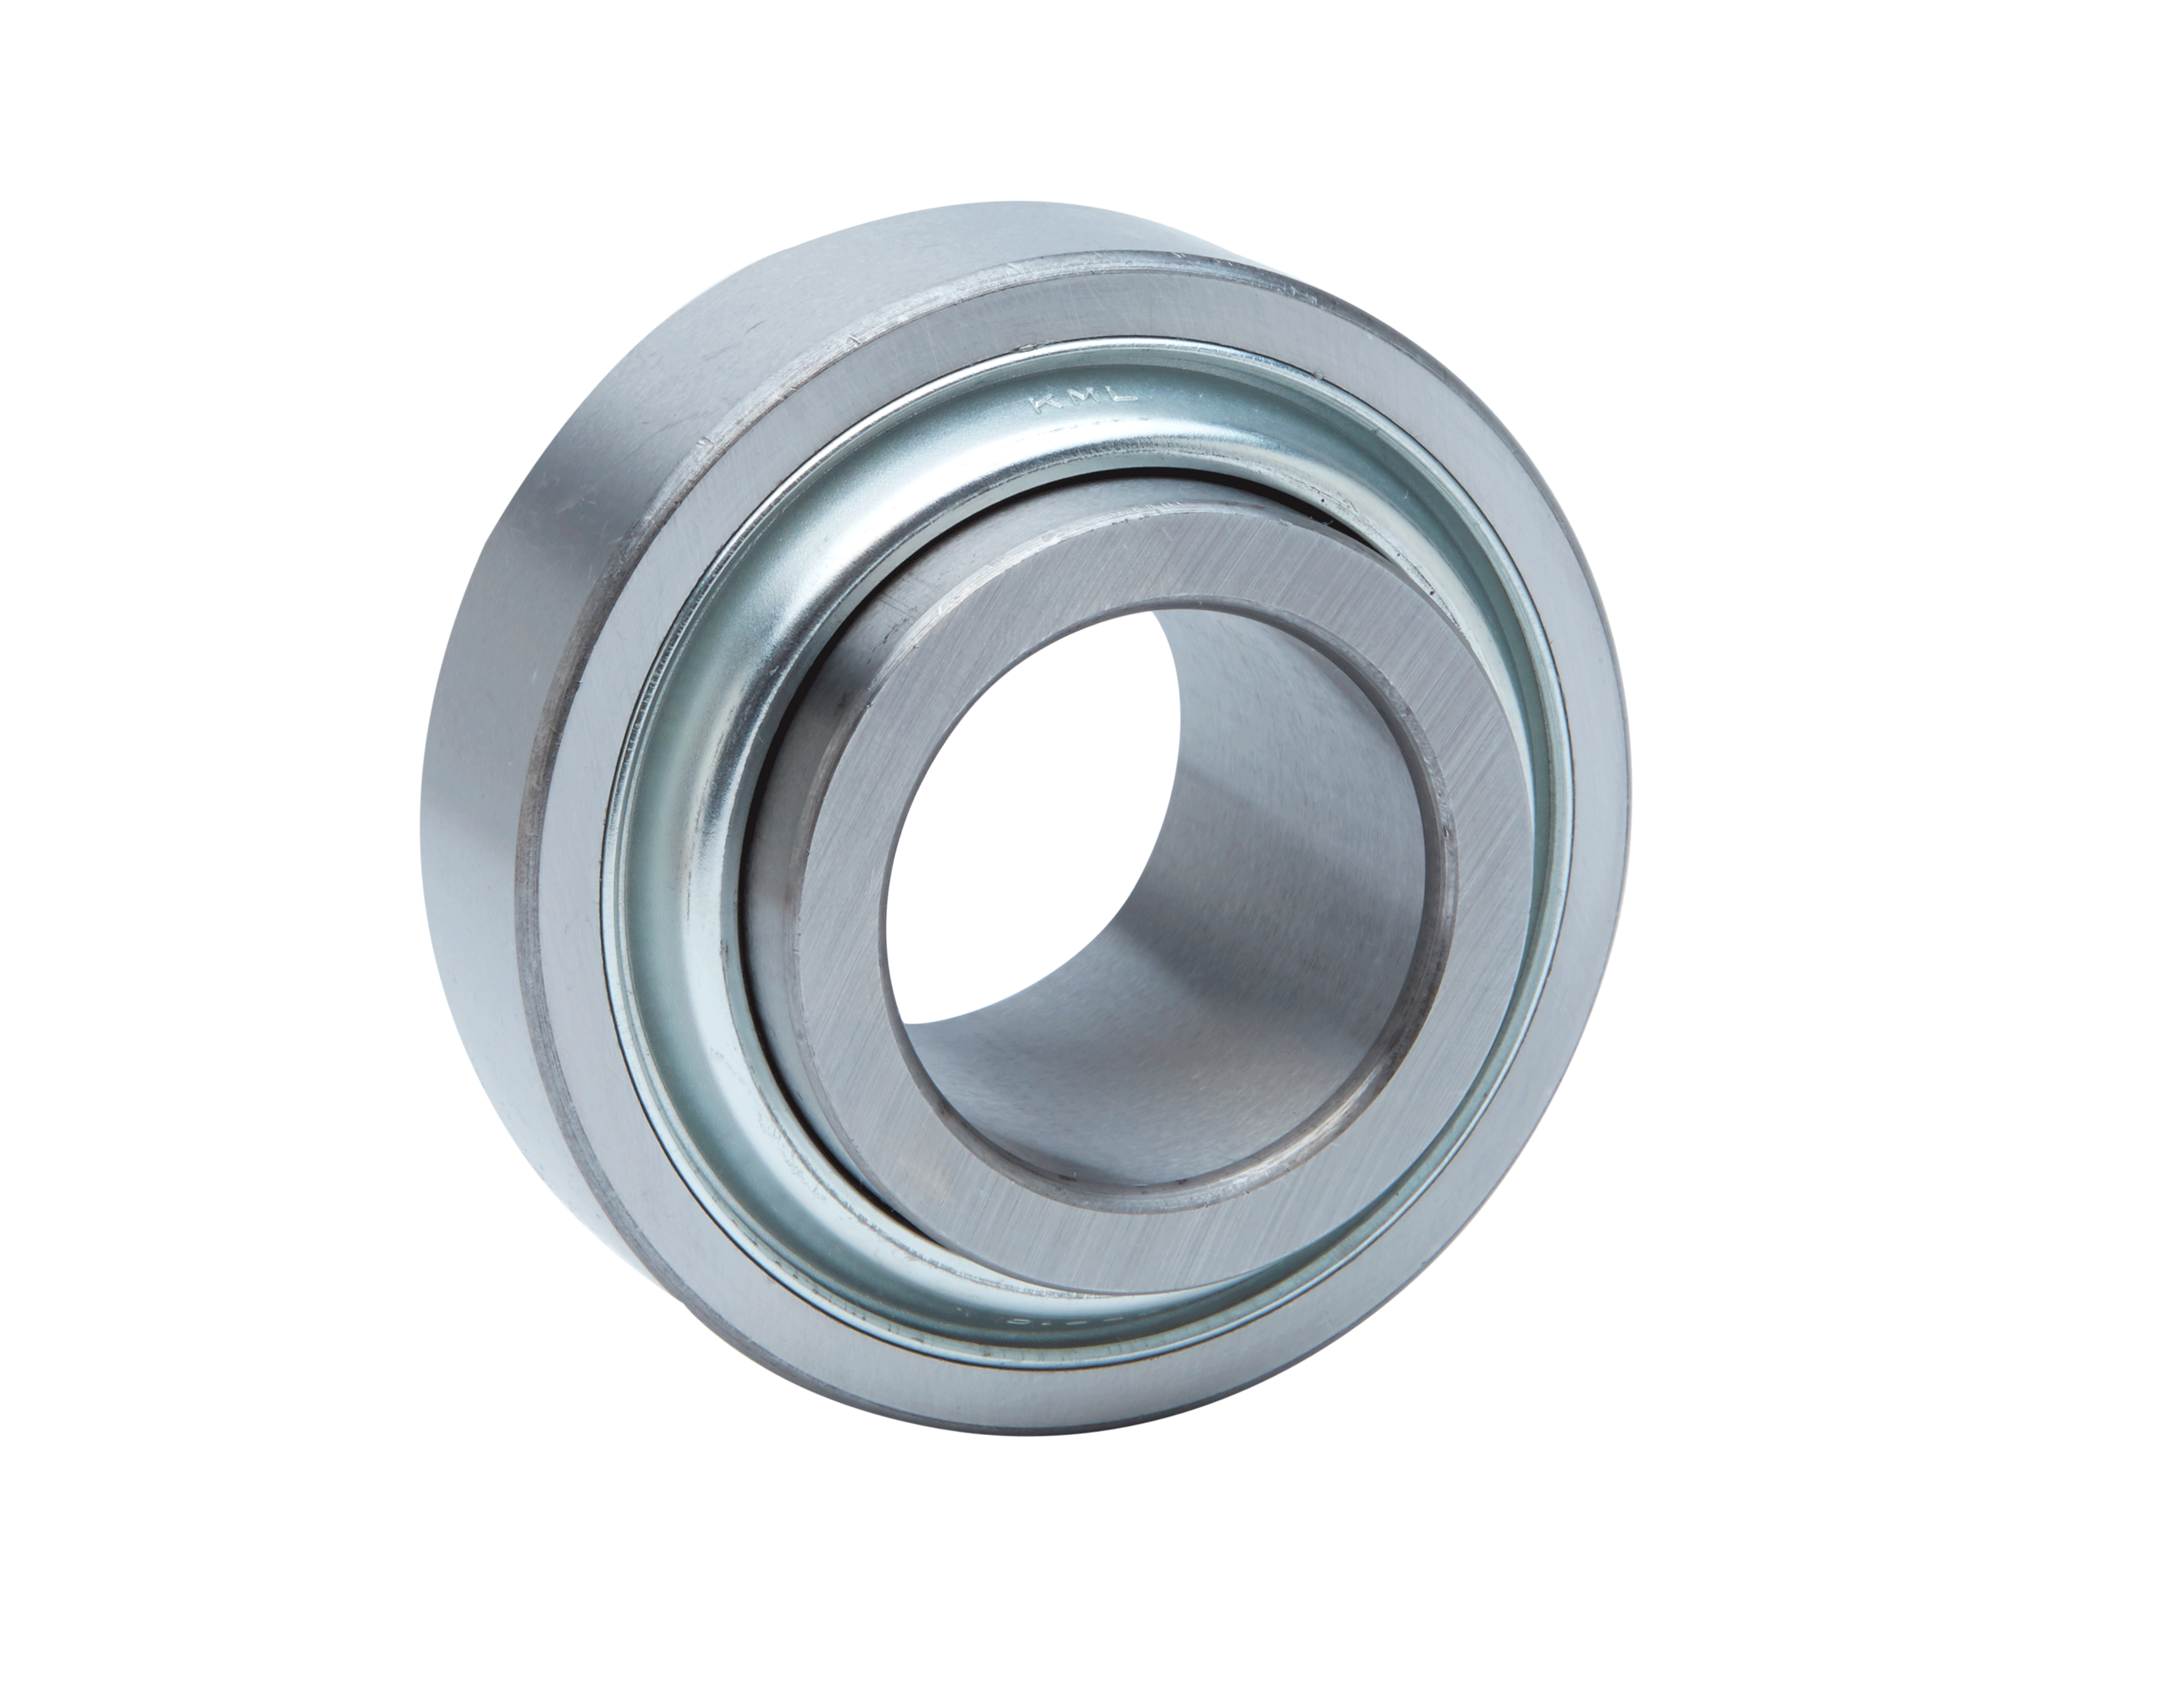 round bore cylindrical non-lube